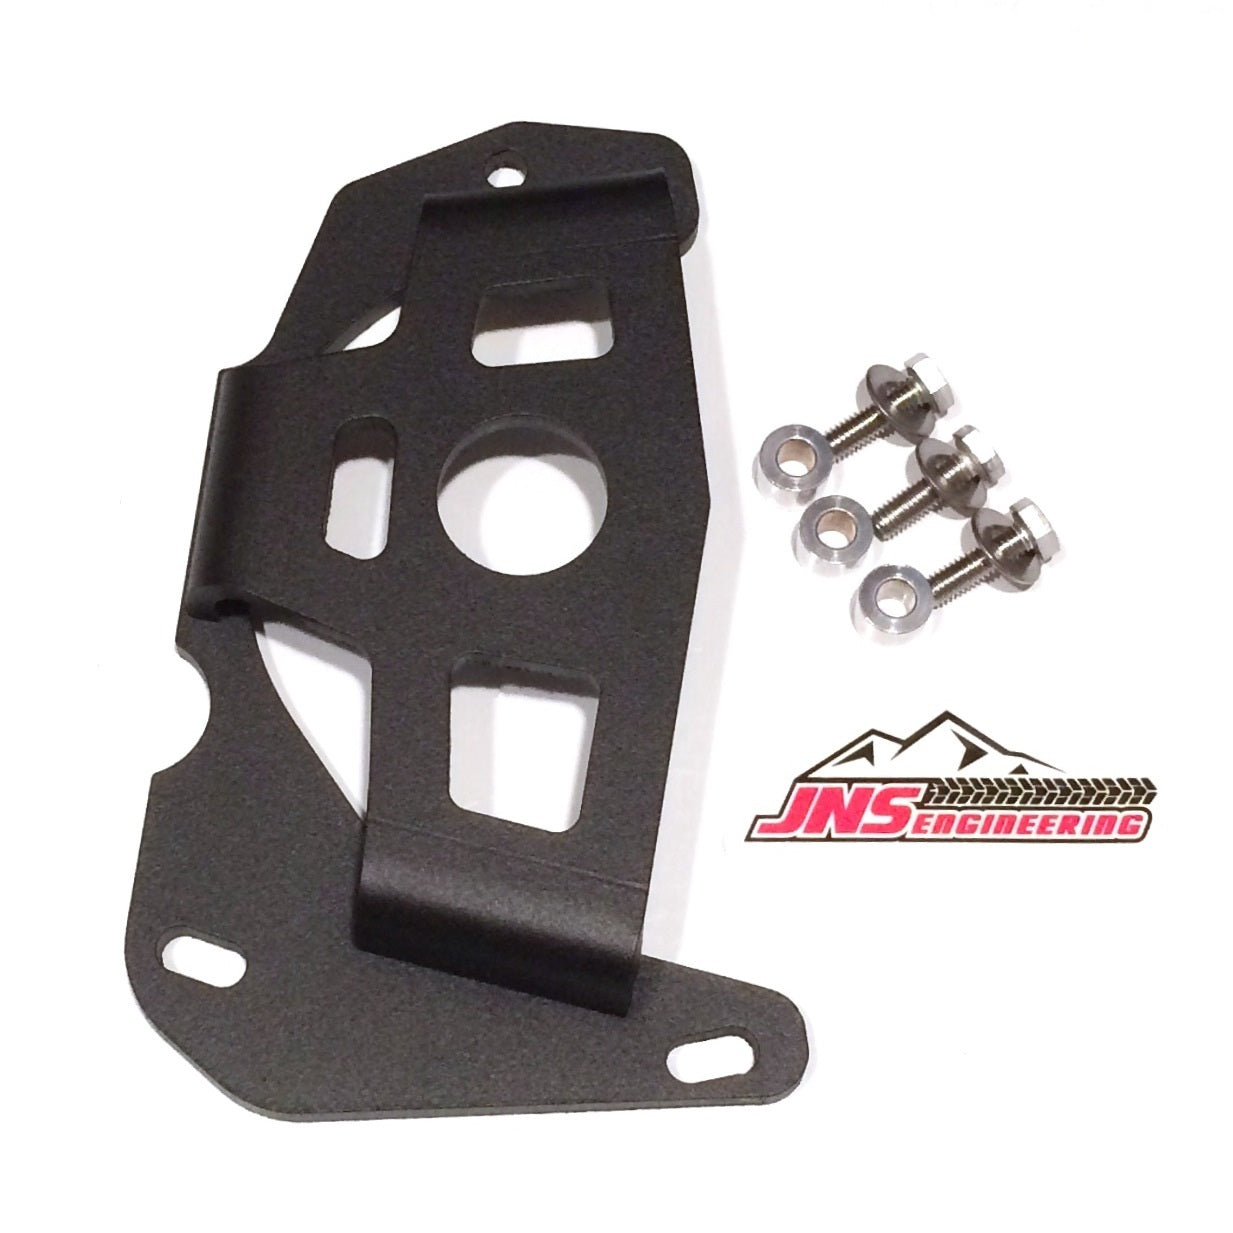 DR650 Case Saver with Sprocket Cover